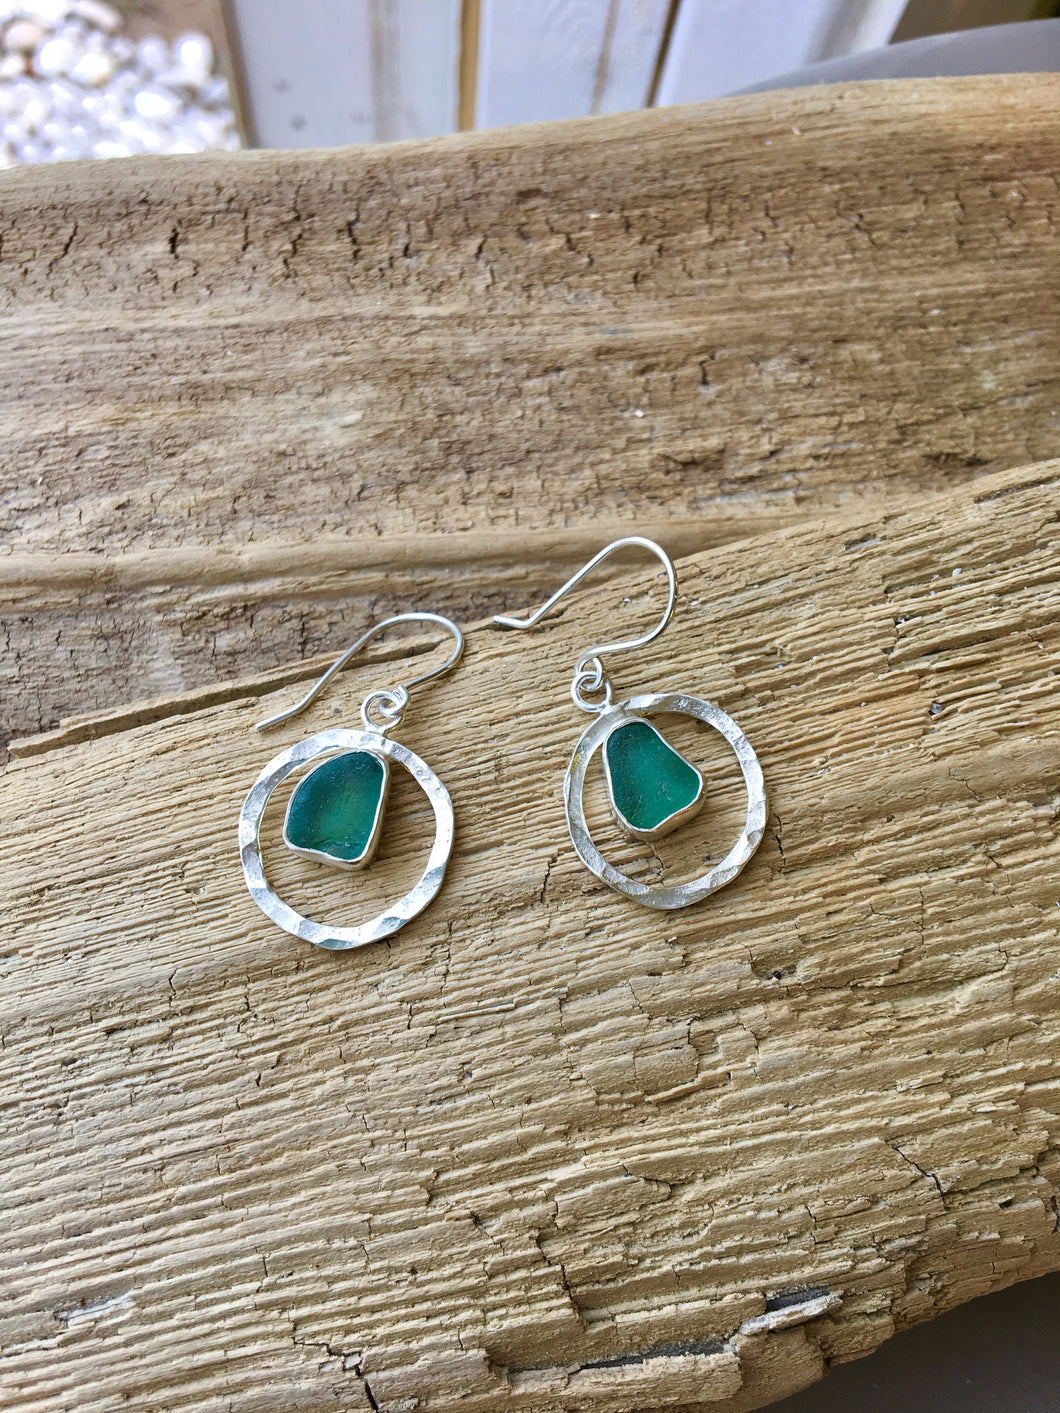 Hammer Textured Silver Circle Earrings with Genuine Sea Glass